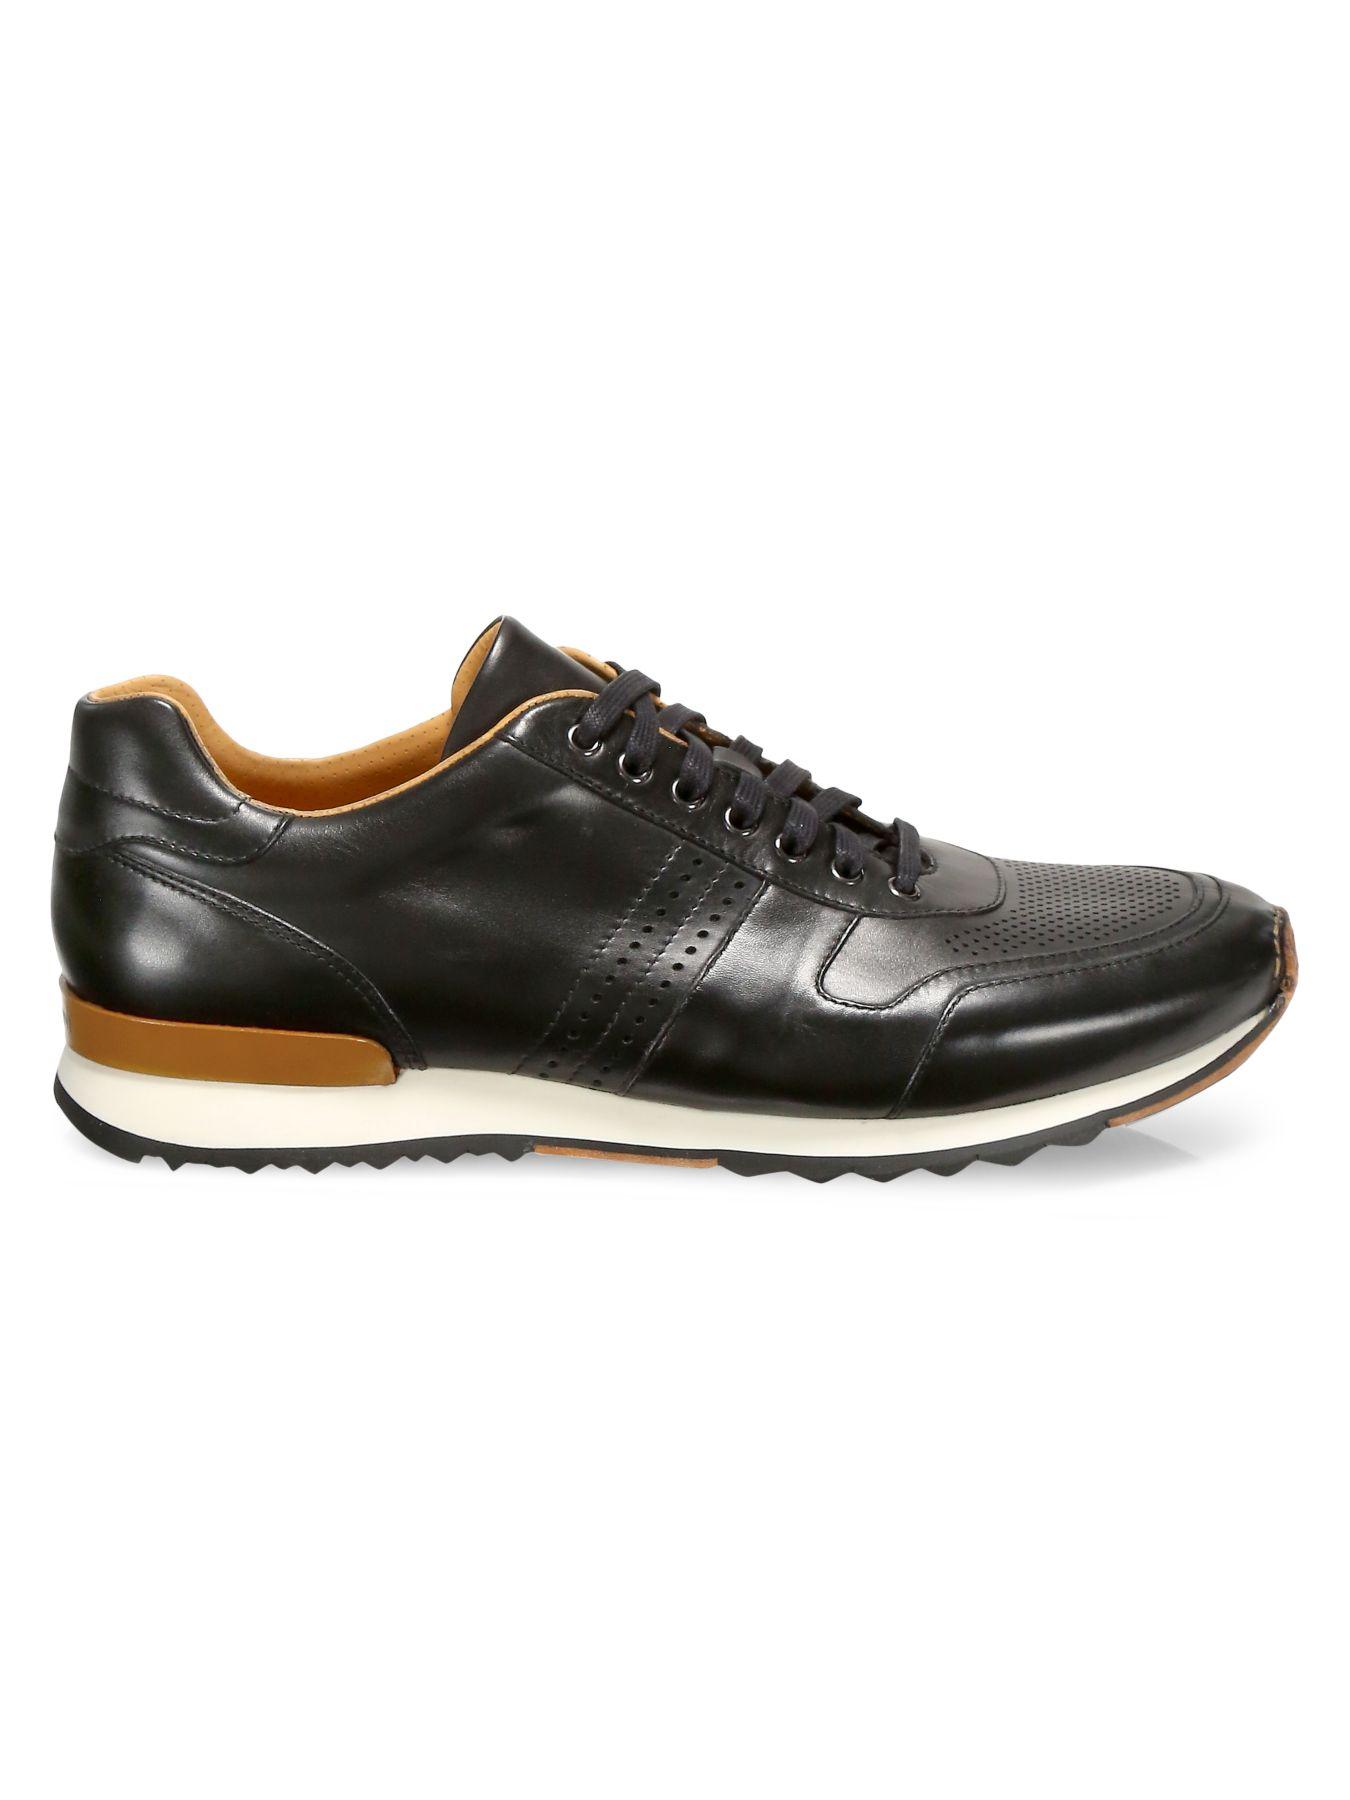 Saks Fifth Avenue Collection Leather Sneakers in Black for Men - Lyst